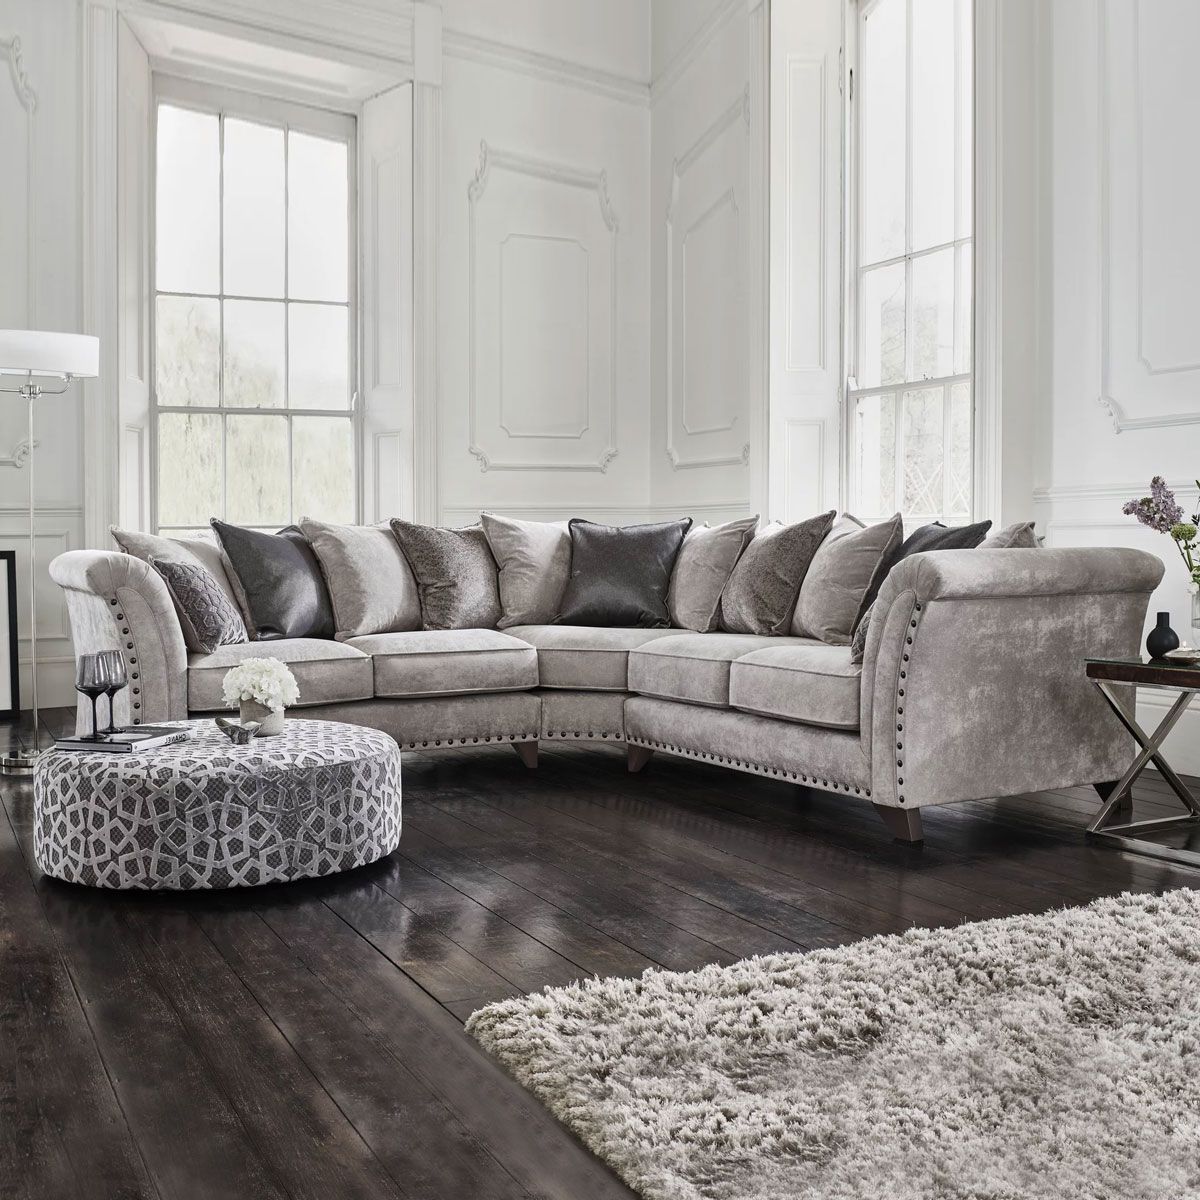 Alexander Large Fabric Pillow Back Corner Sofa With Studs From Aed 6849 |  Ah Furniture In Pillowback Sofa Sectionals (View 17 of 20)